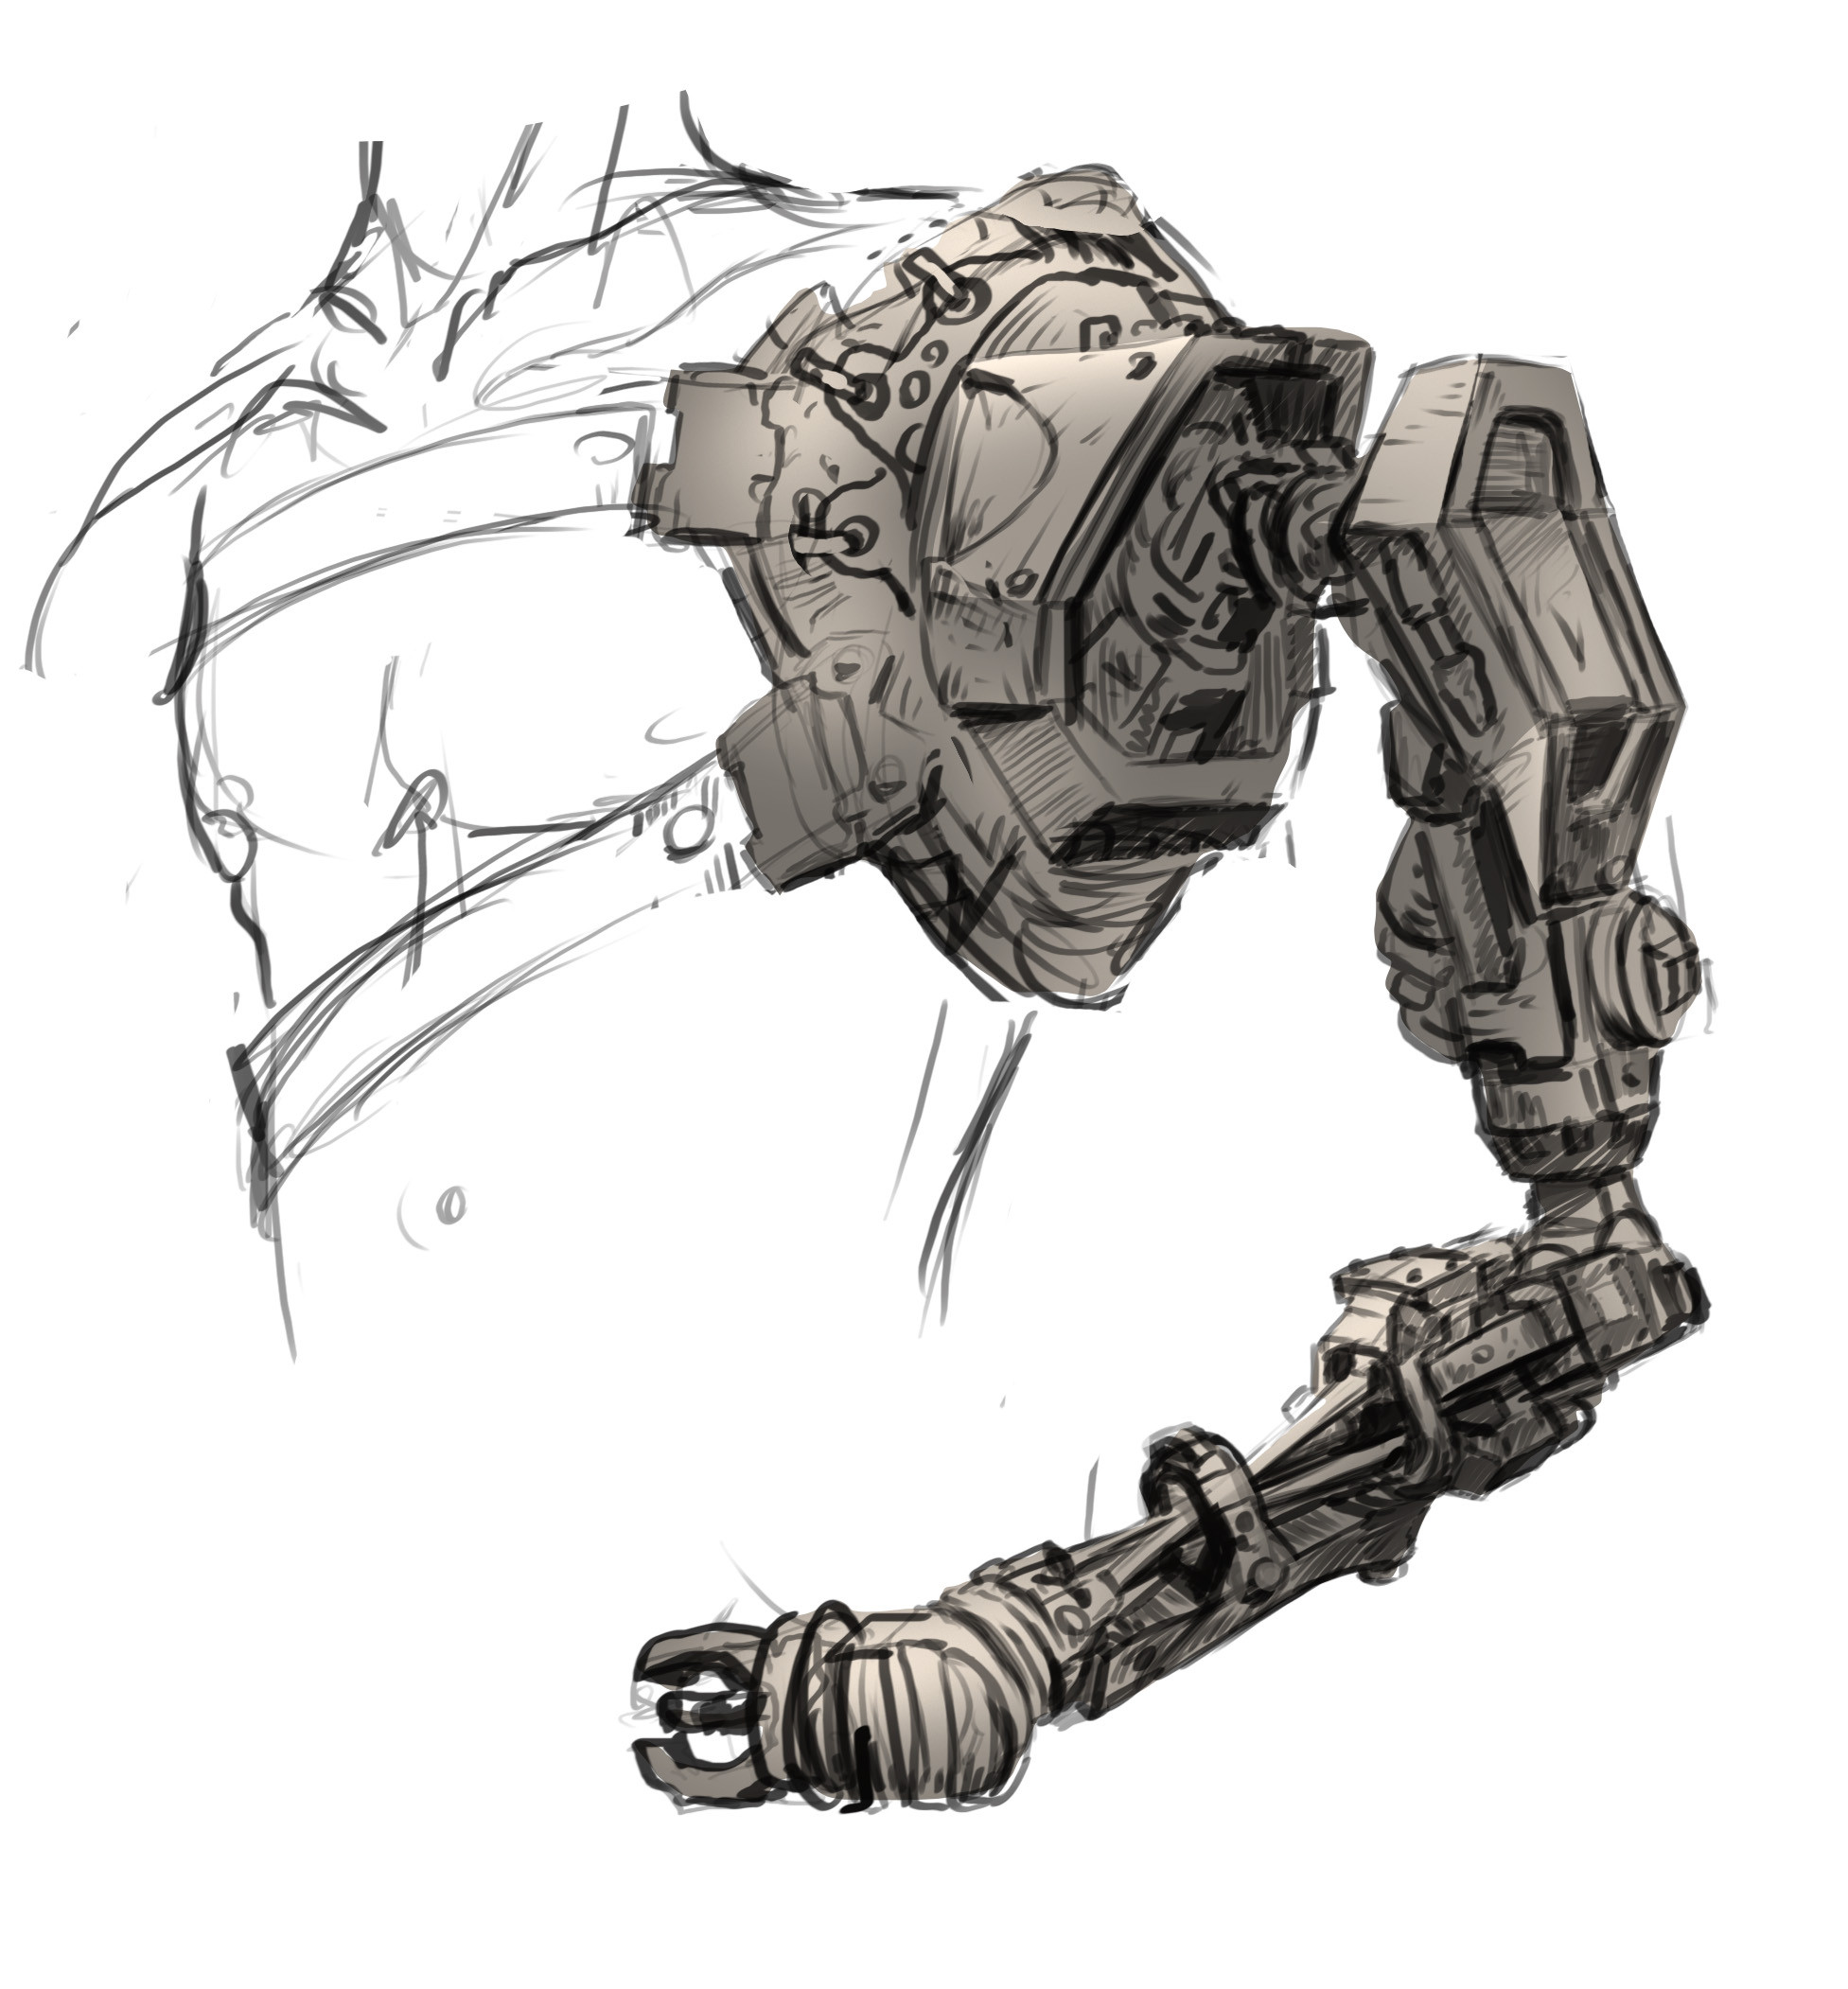 Early concept for his robotic arm